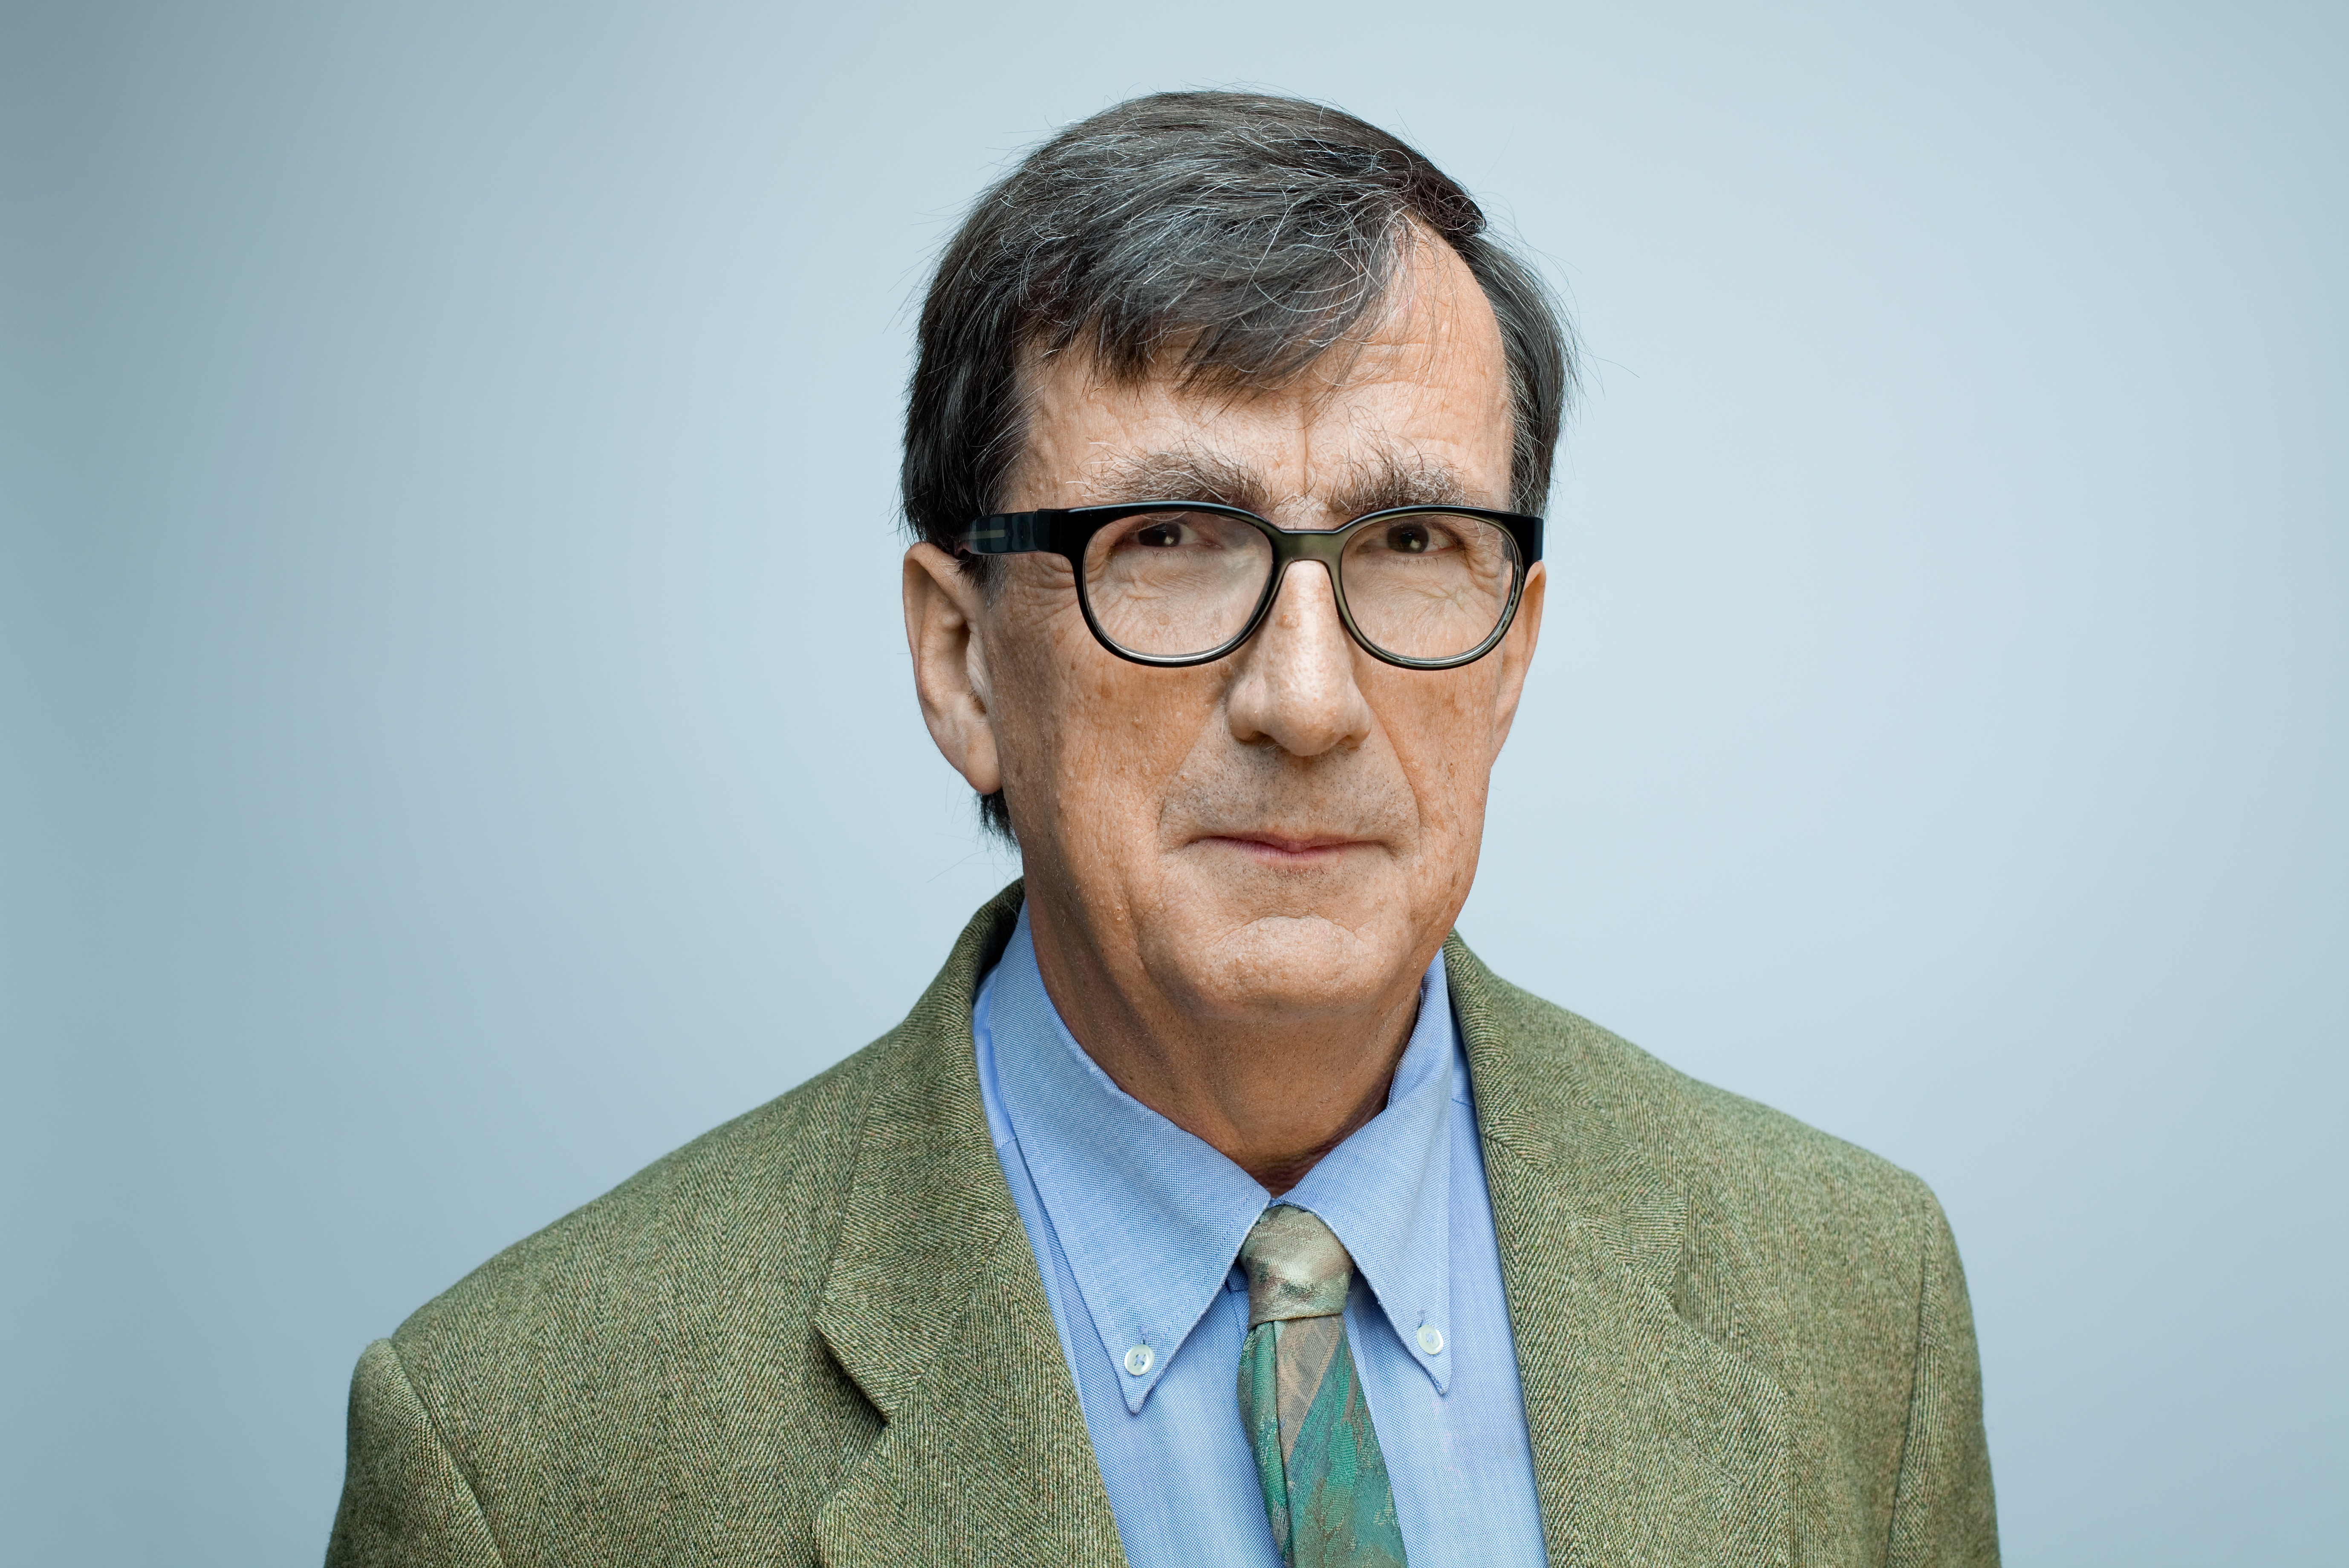 Bruno Latour, anthropologist and sociologist, is this year's Holberg Prize laureate. Latour is professor at Sciences Po, Paris. Photo credit: Manuel Braun.